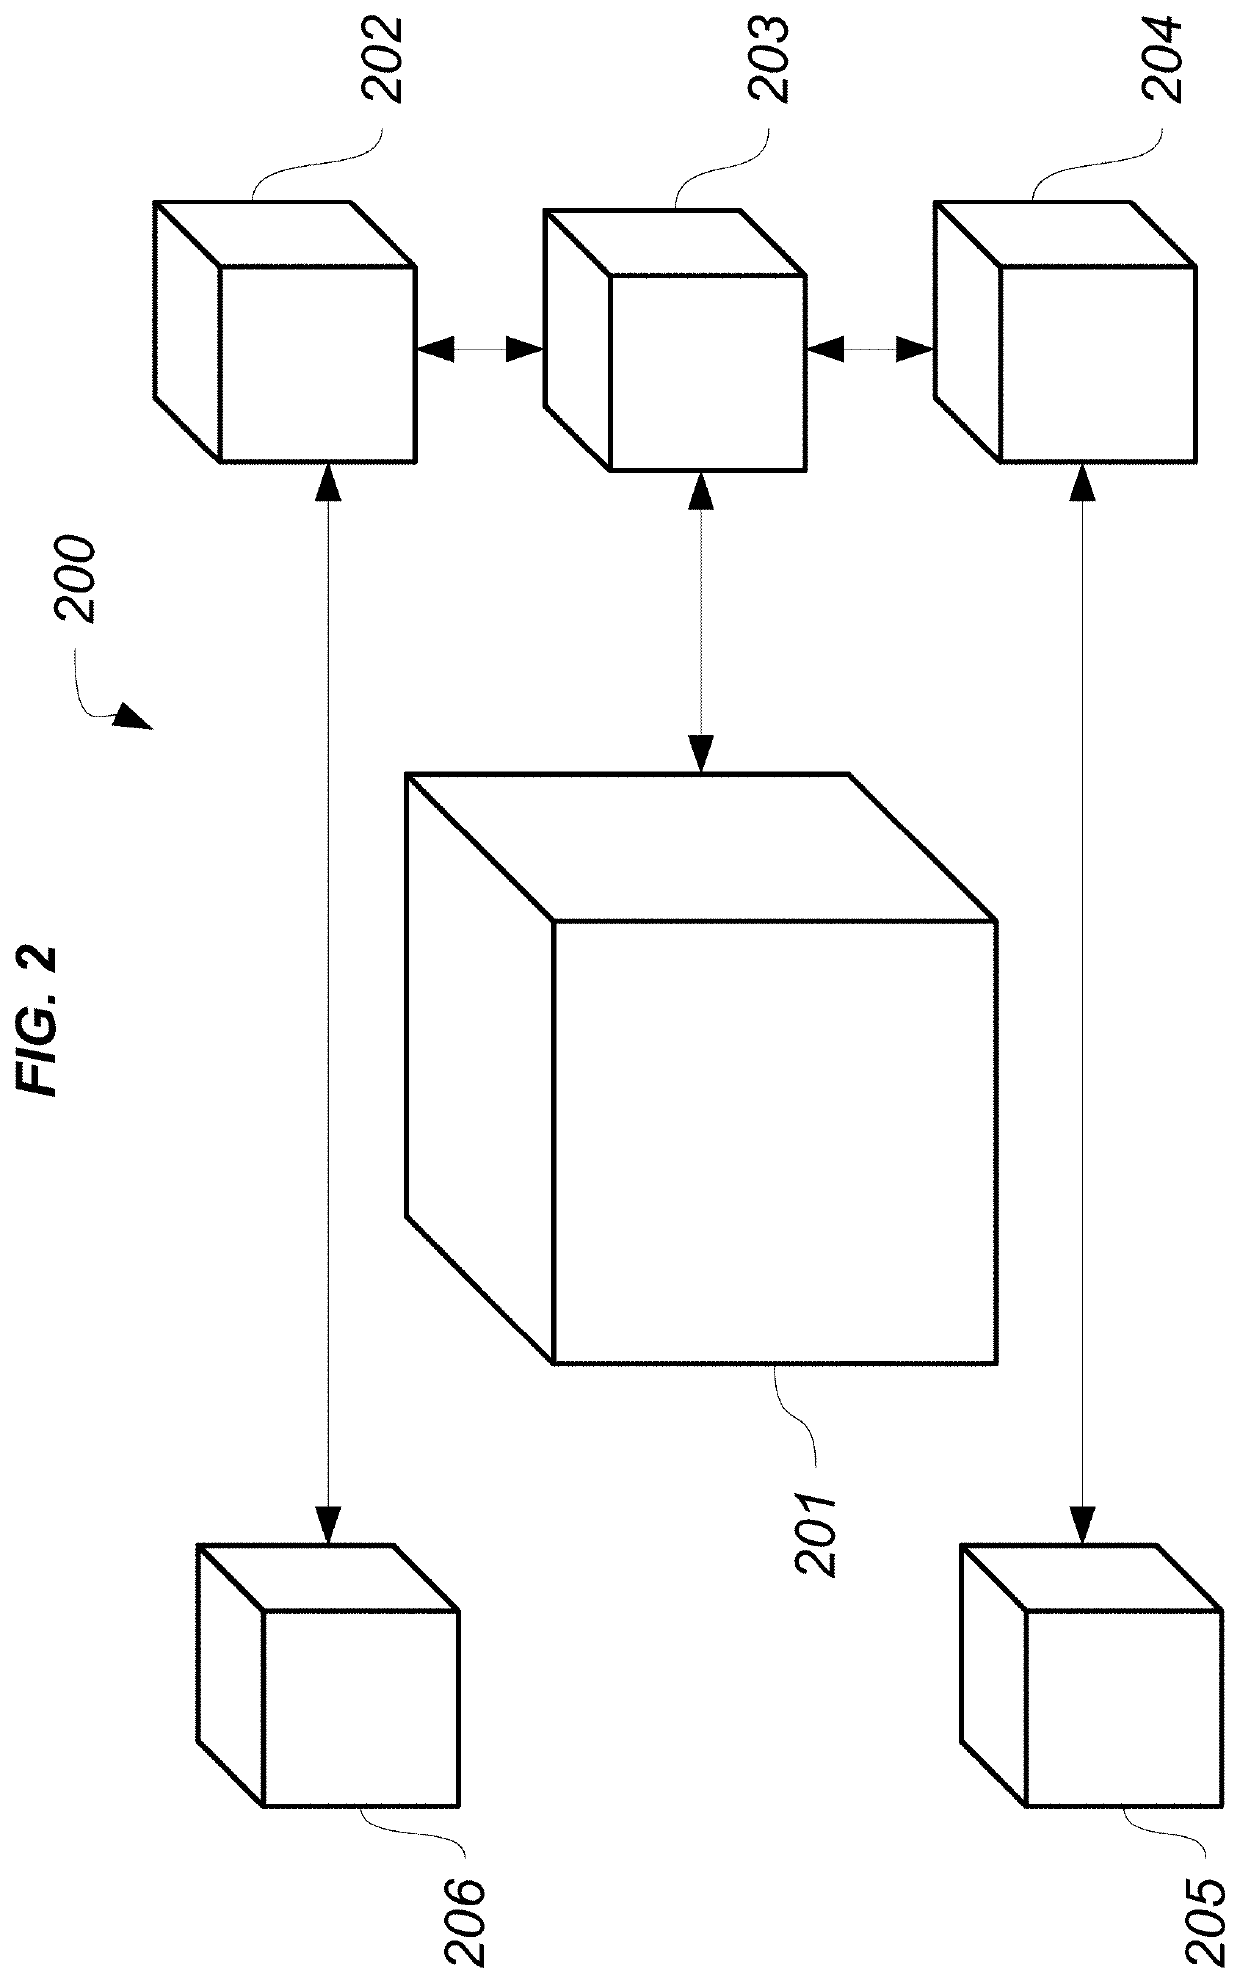 Battery-based system for powering refrigerated transport and other industrial applications